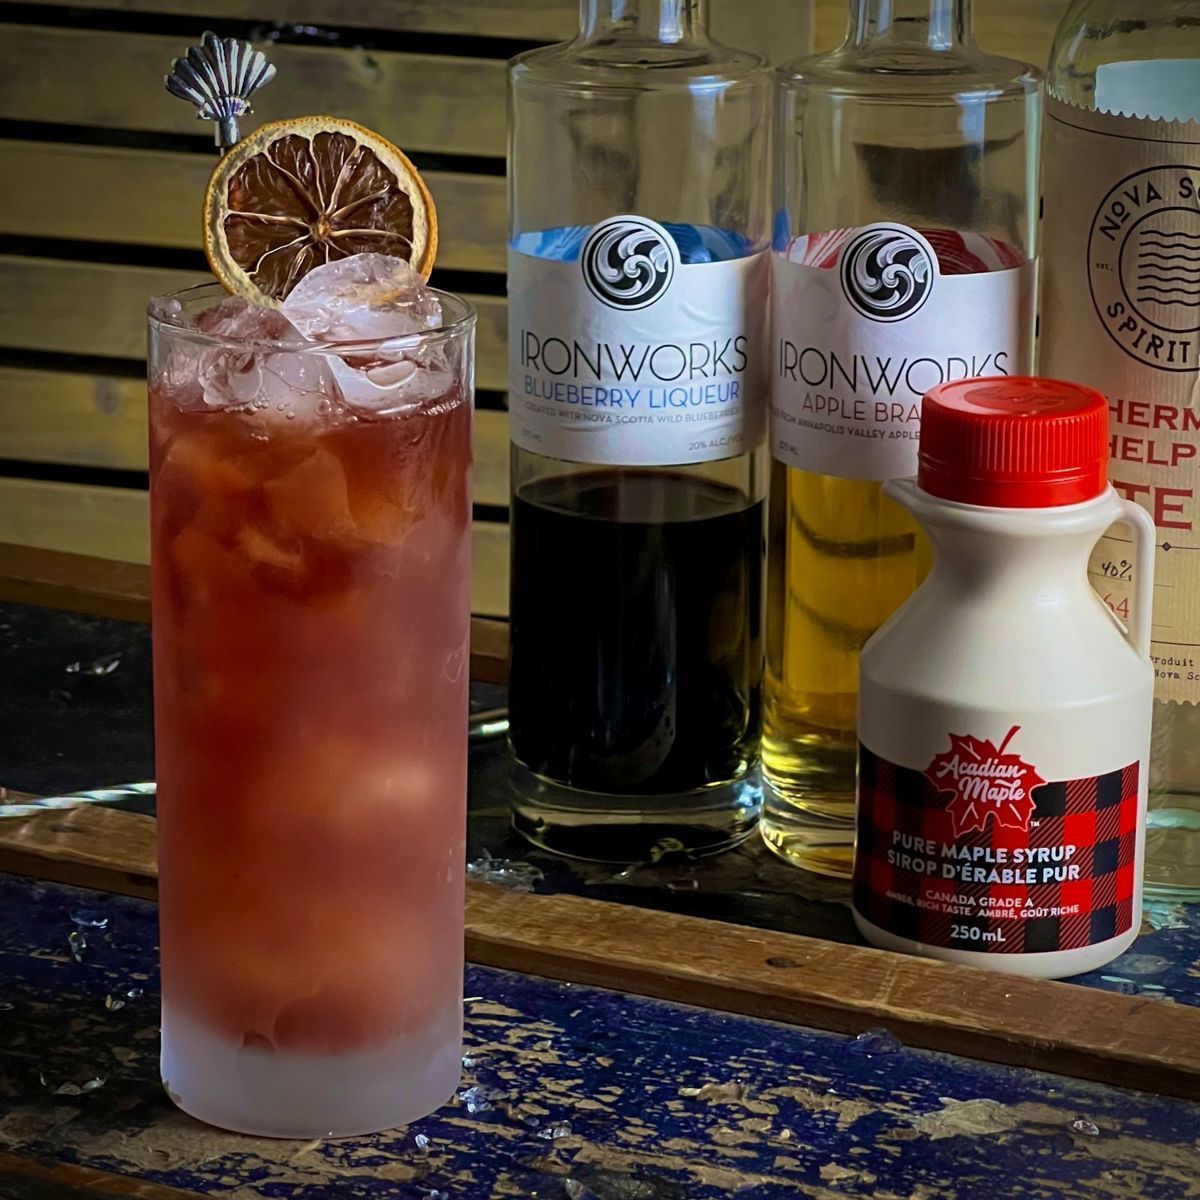 A take on a recent favourite of mine, the ultra-vintage Philadelphia Fish House Punch, using fantastic ingredients from the East Coast of Canada.

Recommended Brands:
•Ironworks Distillery Apple Brandy
& Blueberry Liqueur
•NS Spirit Co. Fisherman’s Helper White Rum
•Acadian Maple syrup
•Tetley tea